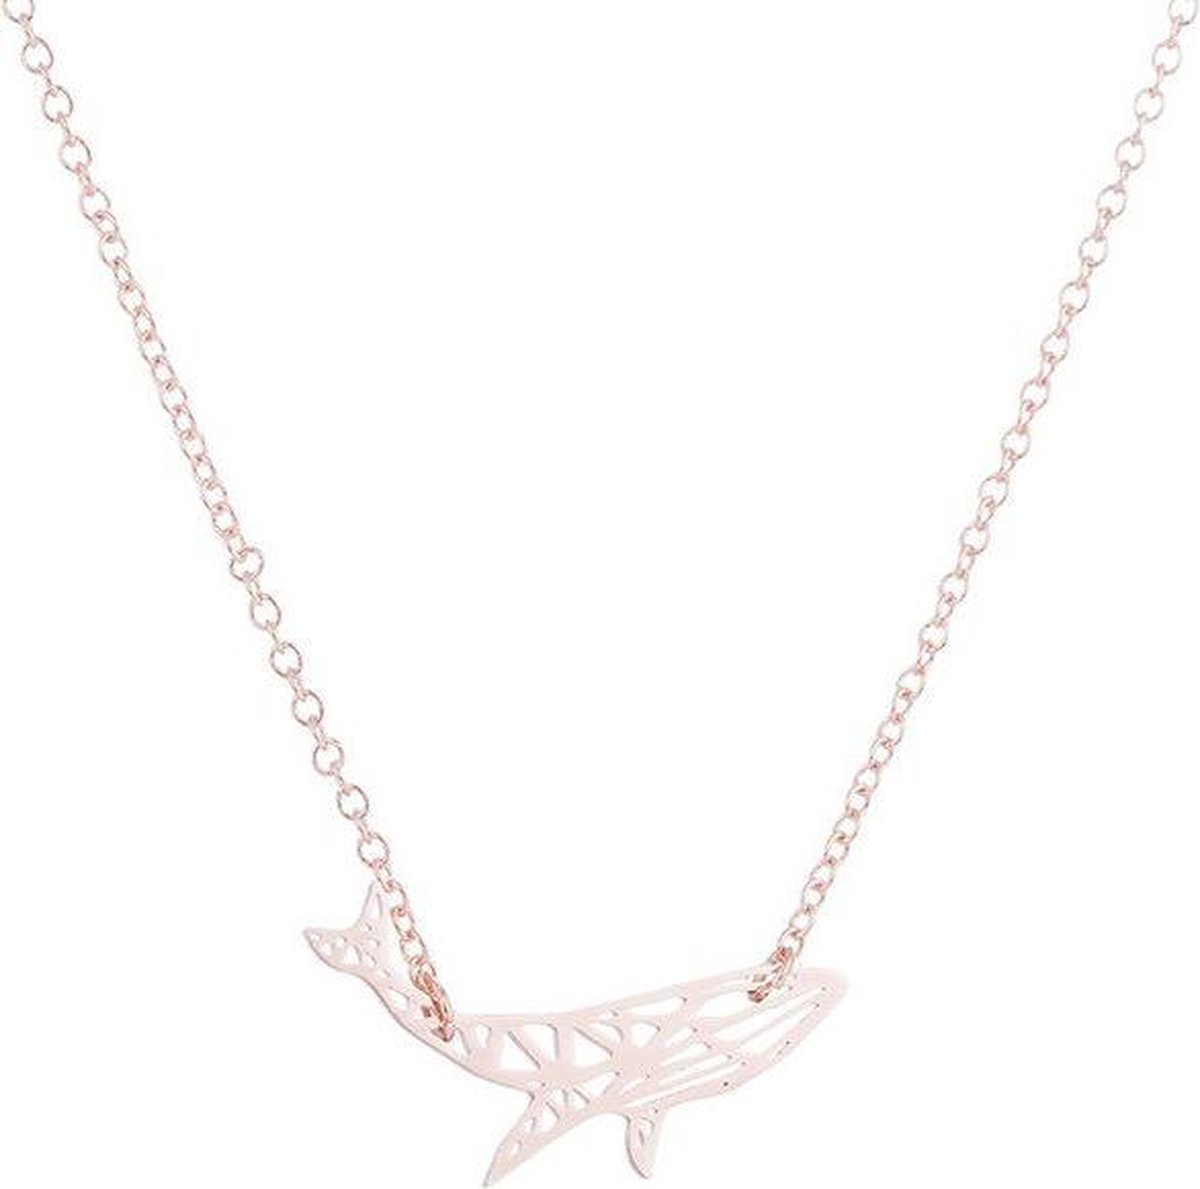 24/7 Jewelry Collection Origami Walvis Ketting - Rosé Goudkleurig